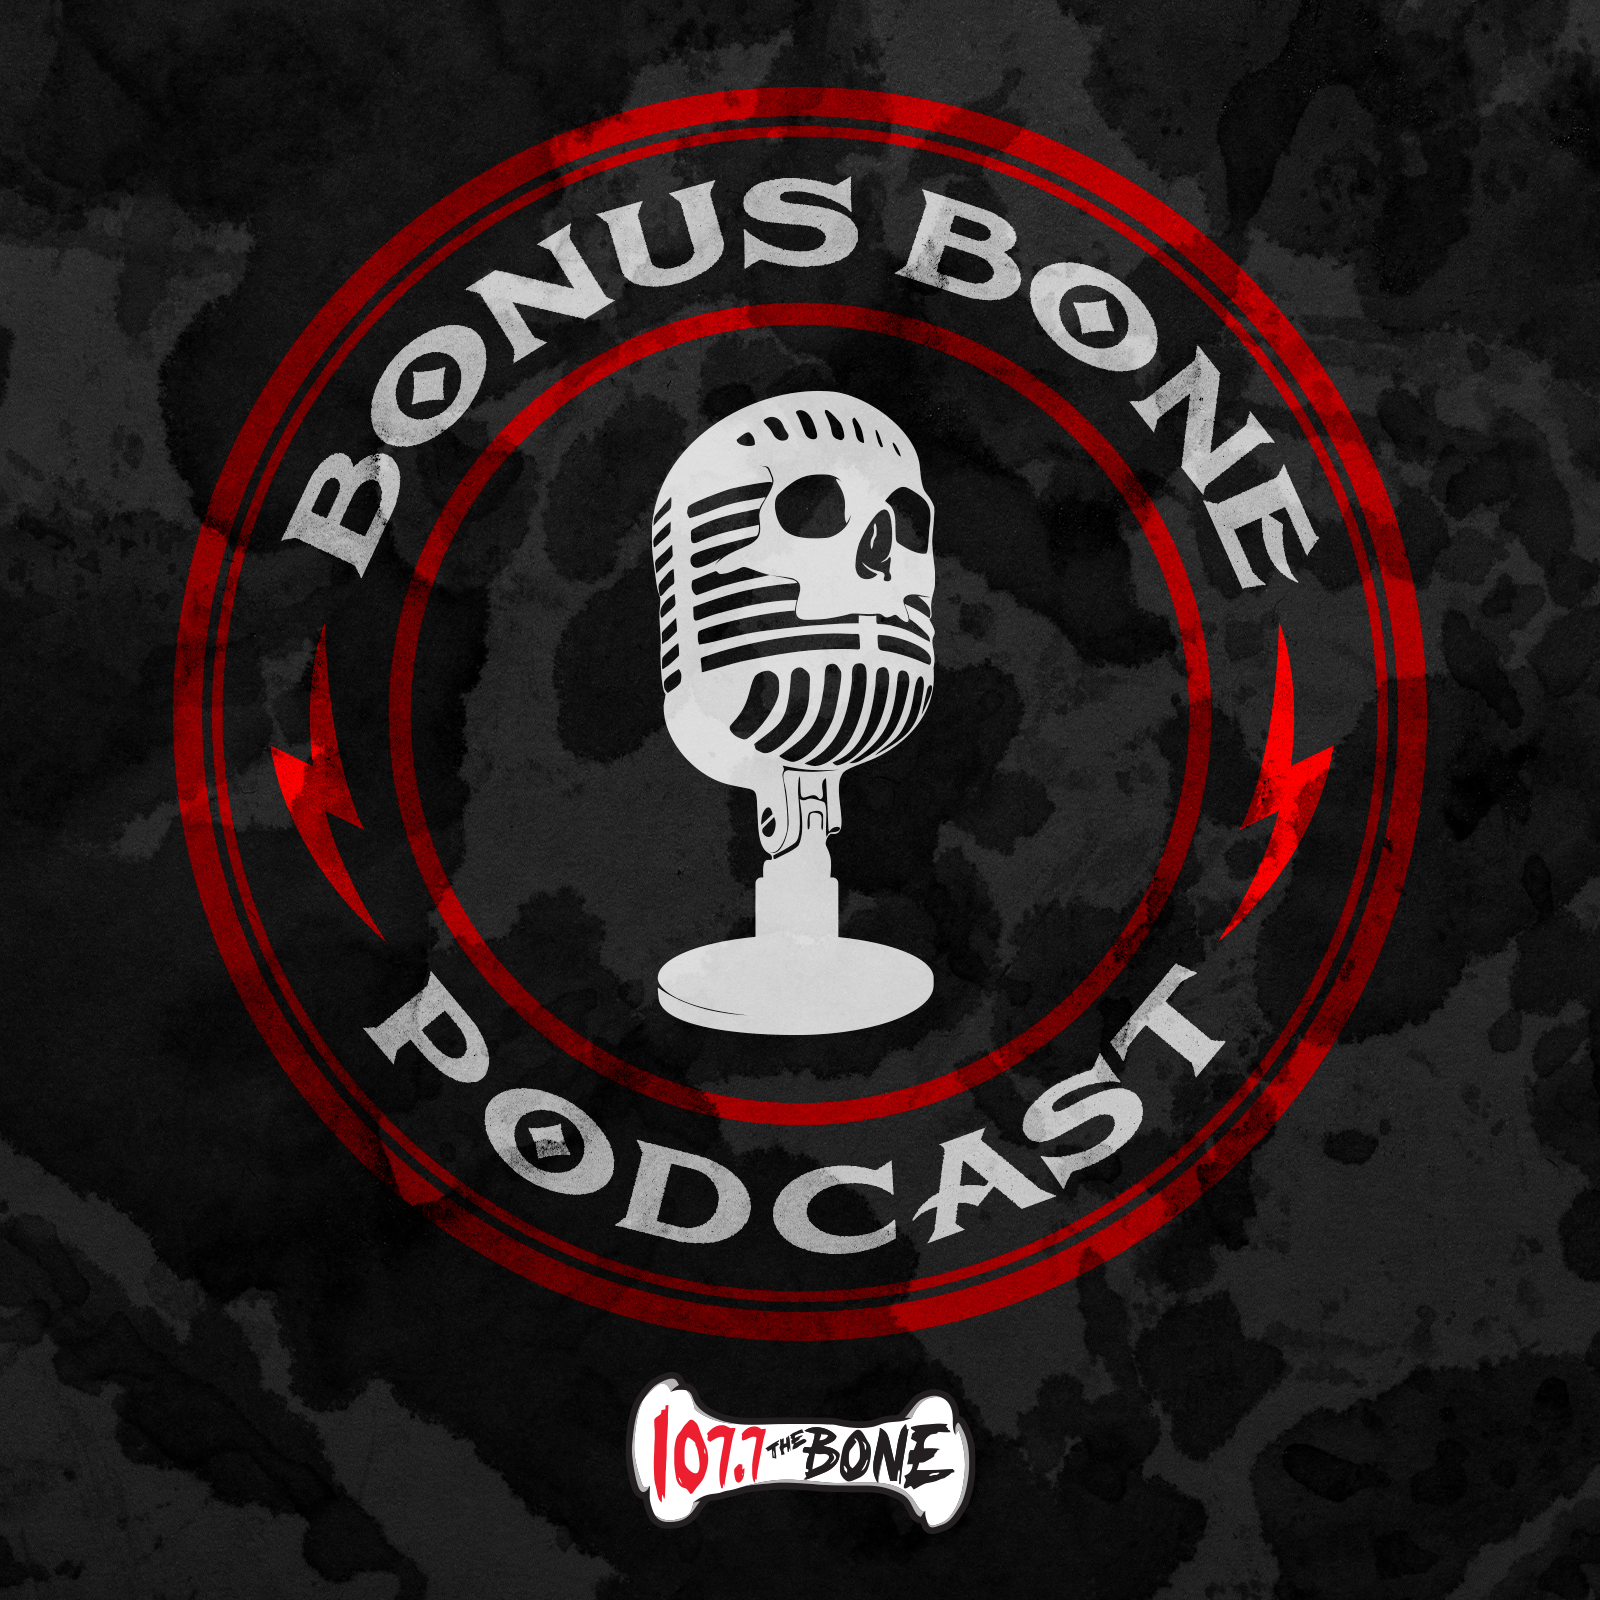 The Bonus Bone: What Would Your Last Meal Be?